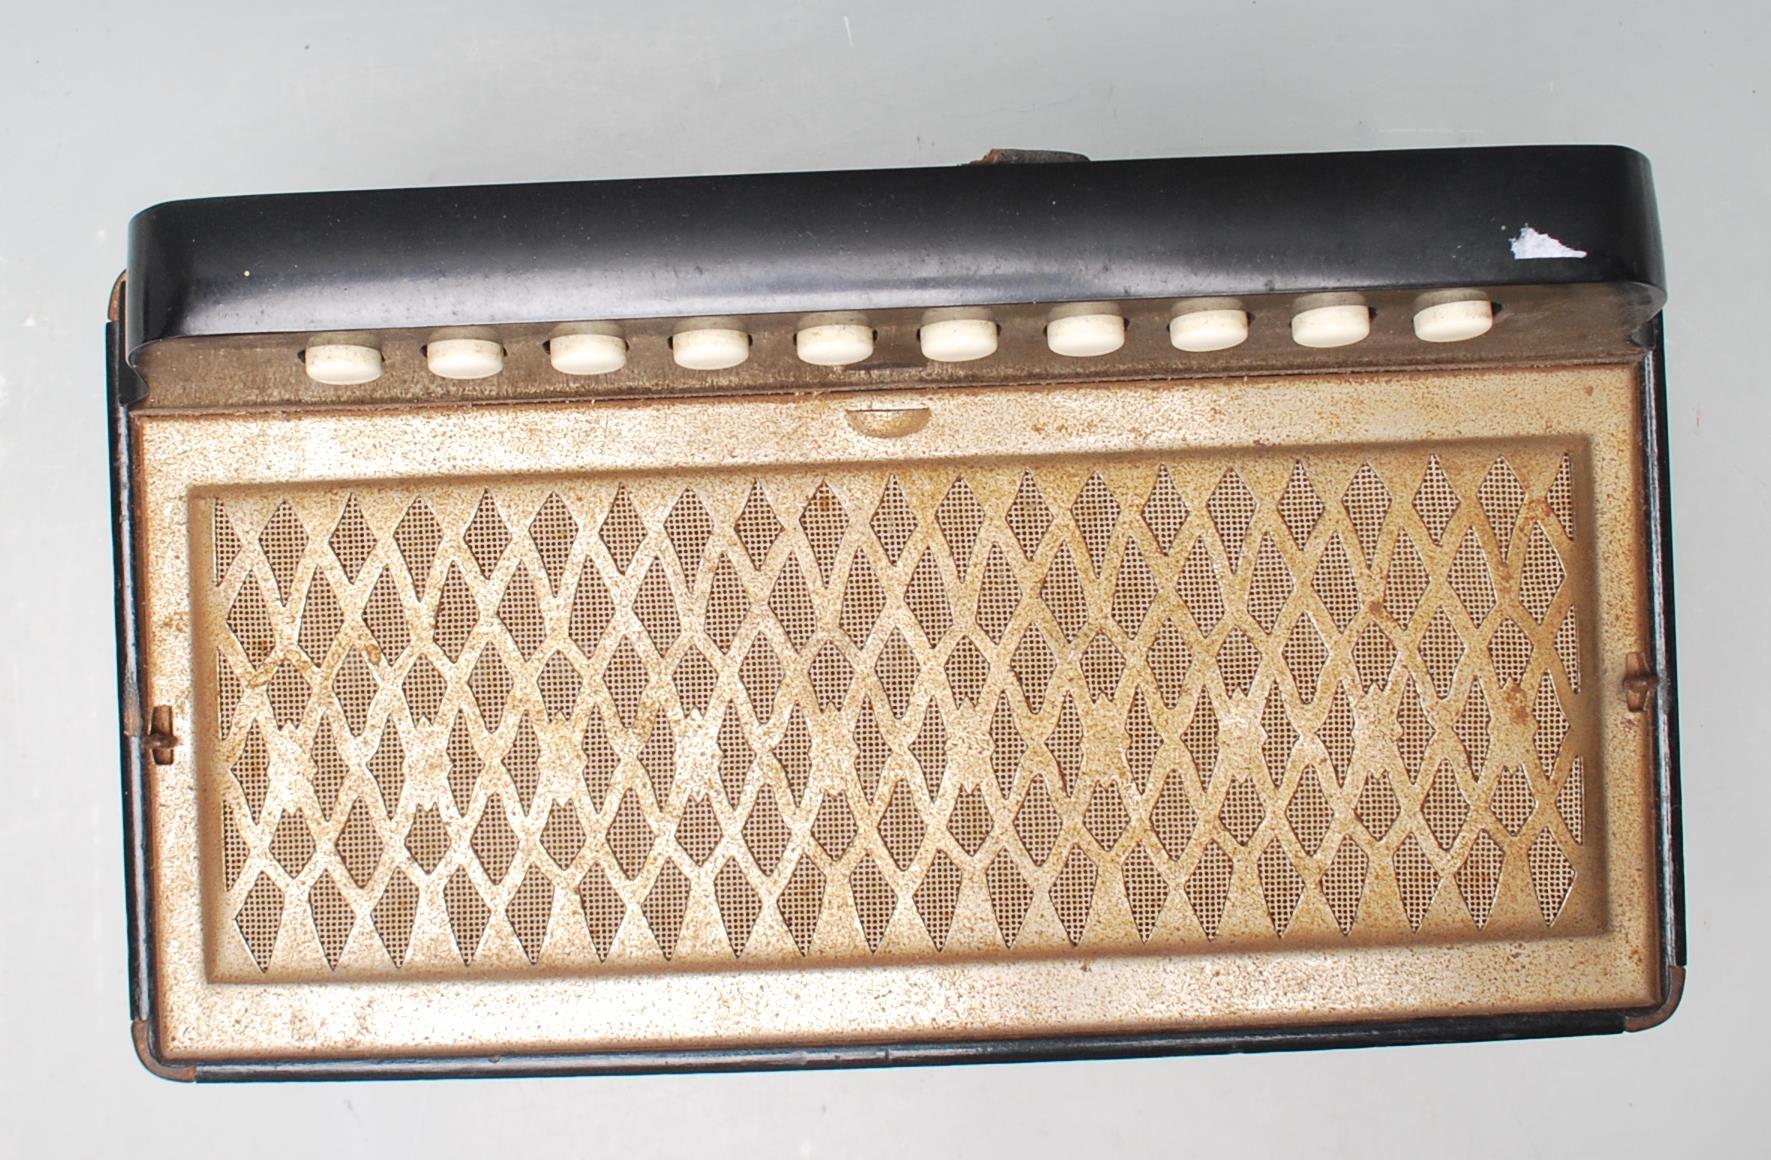 EARLY 20TH CENTURY 1930S VINTAGE ACCORDIAN BY HOHNER - Image 4 of 7